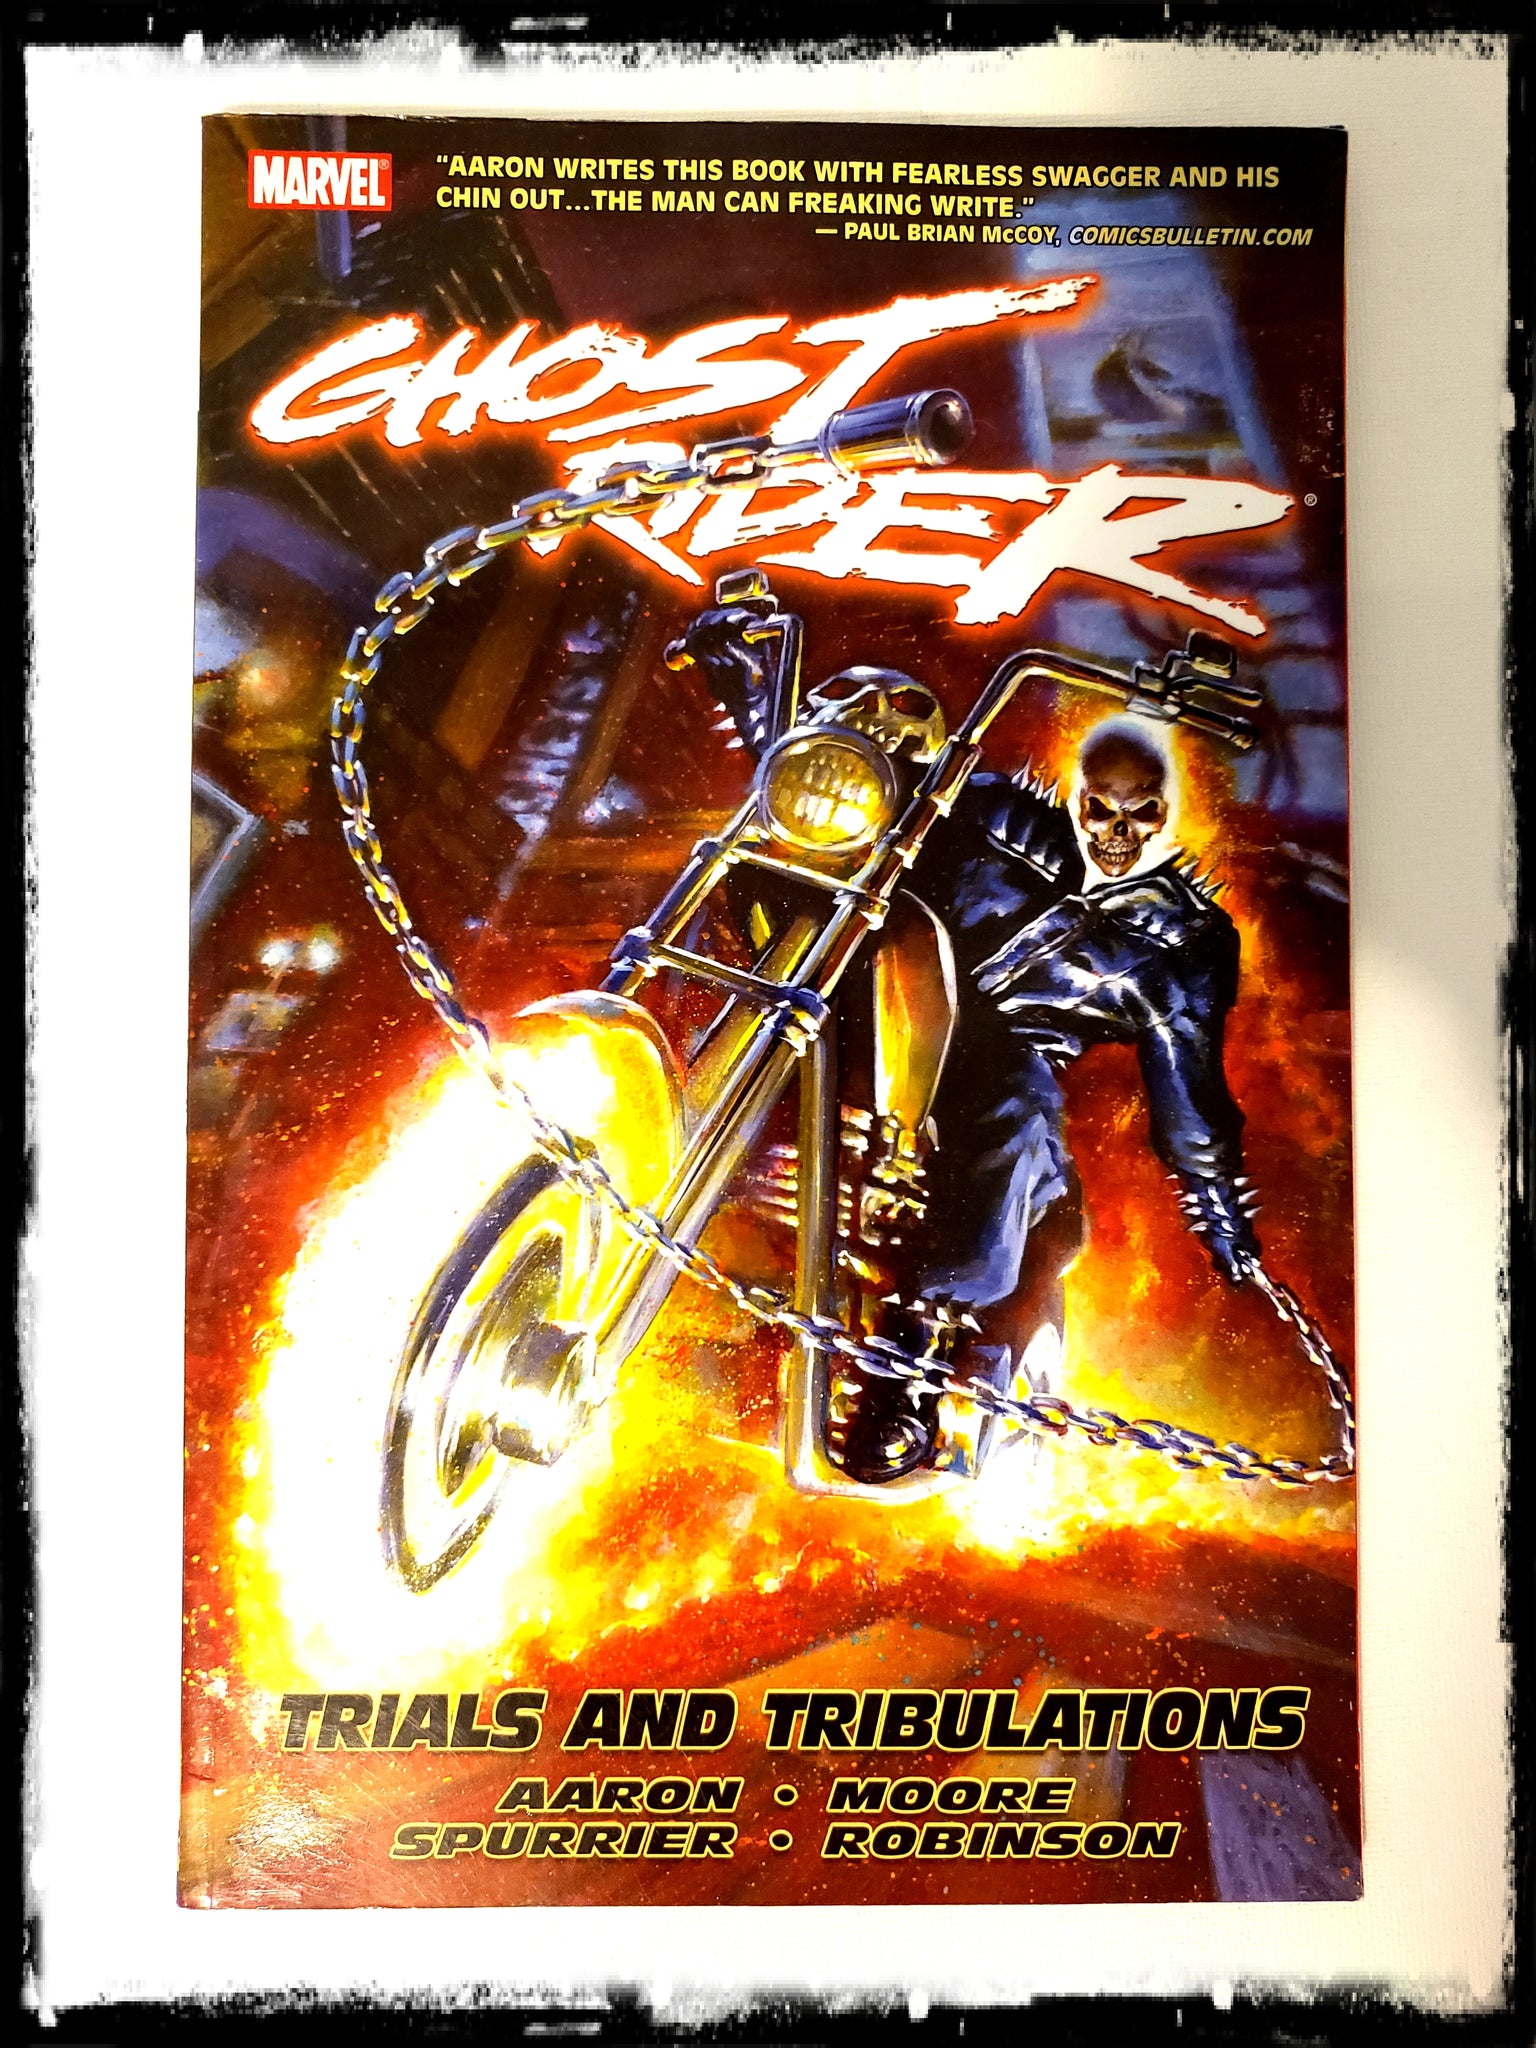 GHOST RIDER: TRIALS AND TRIBULATIONS - 2009 TRADE PAPERBACK (OUT OF PRINT)